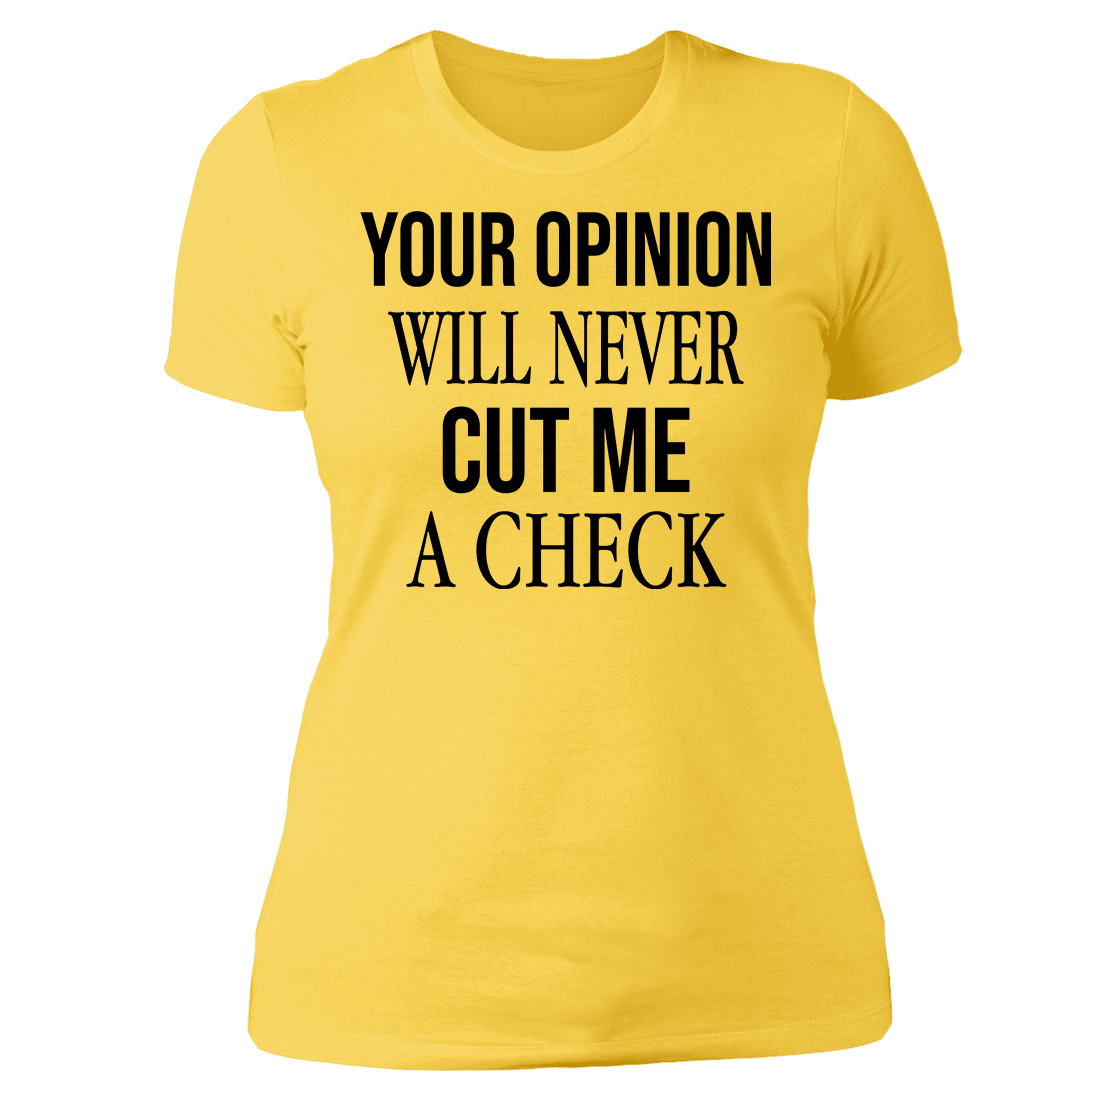 Your Opinion Will Never Cut Me A Check Ladies Boyfriend Shirt